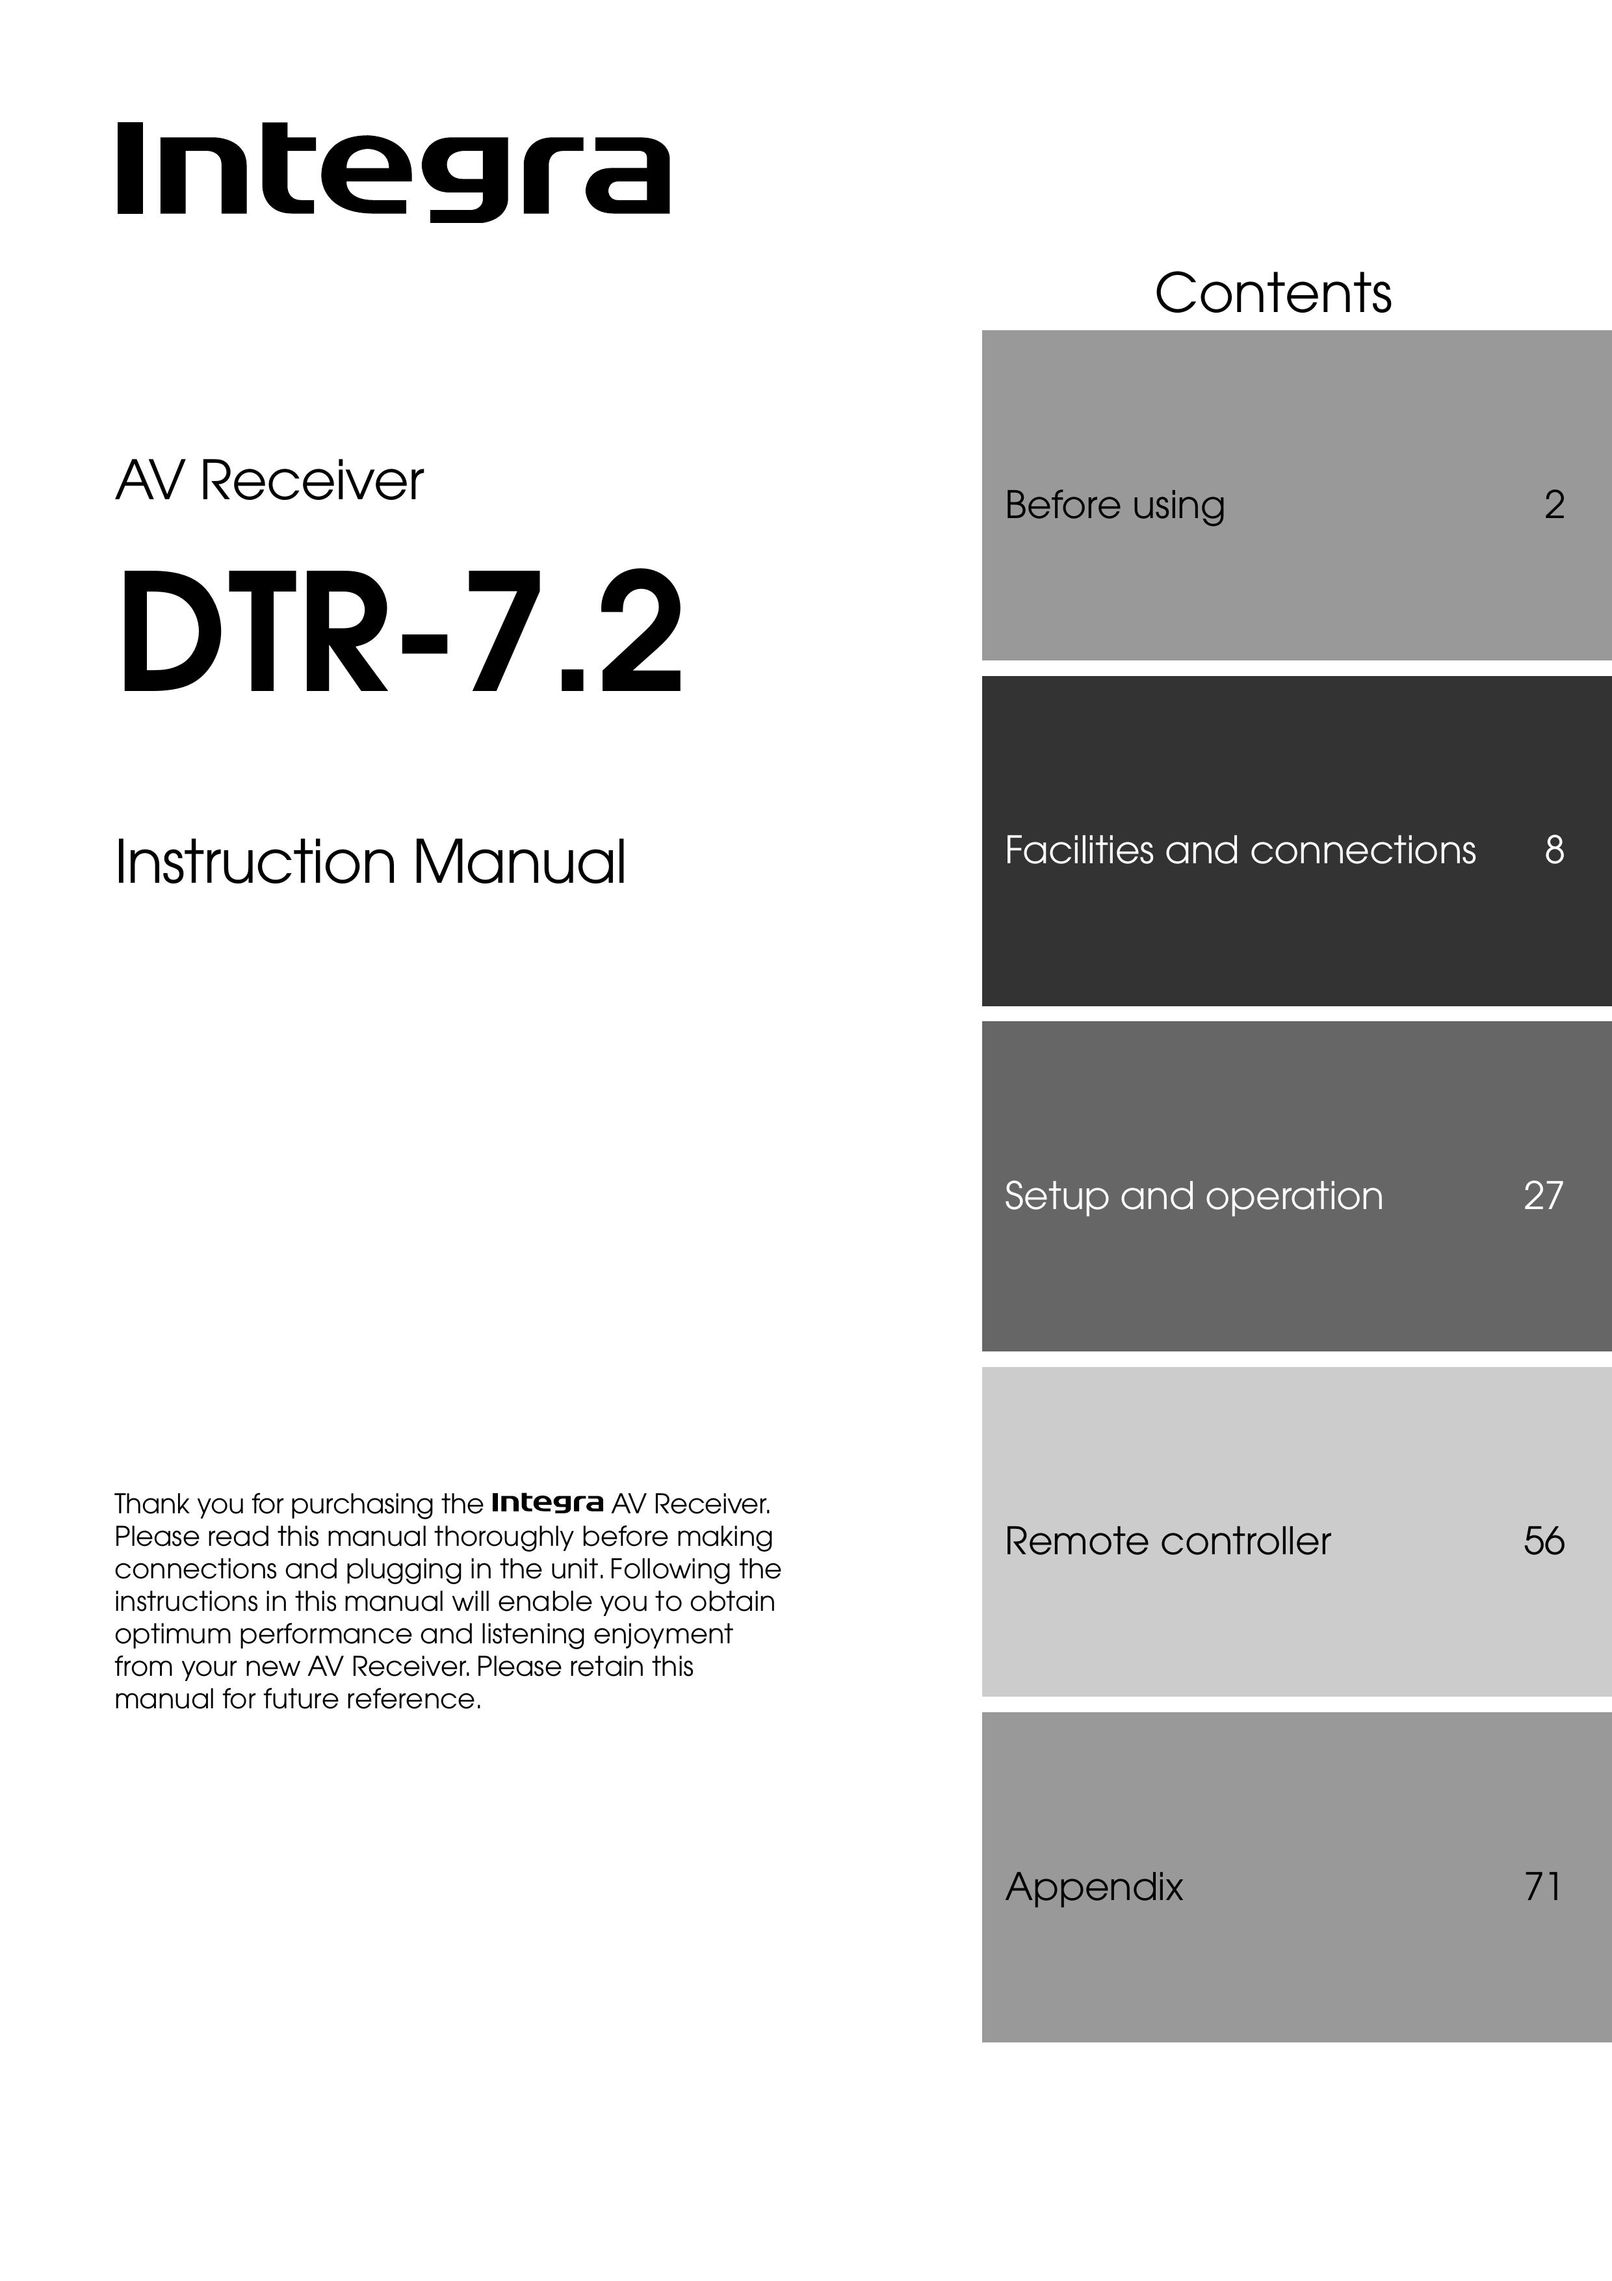 Integra DTR-7.2 Stereo Receiver User Manual (Page 1)